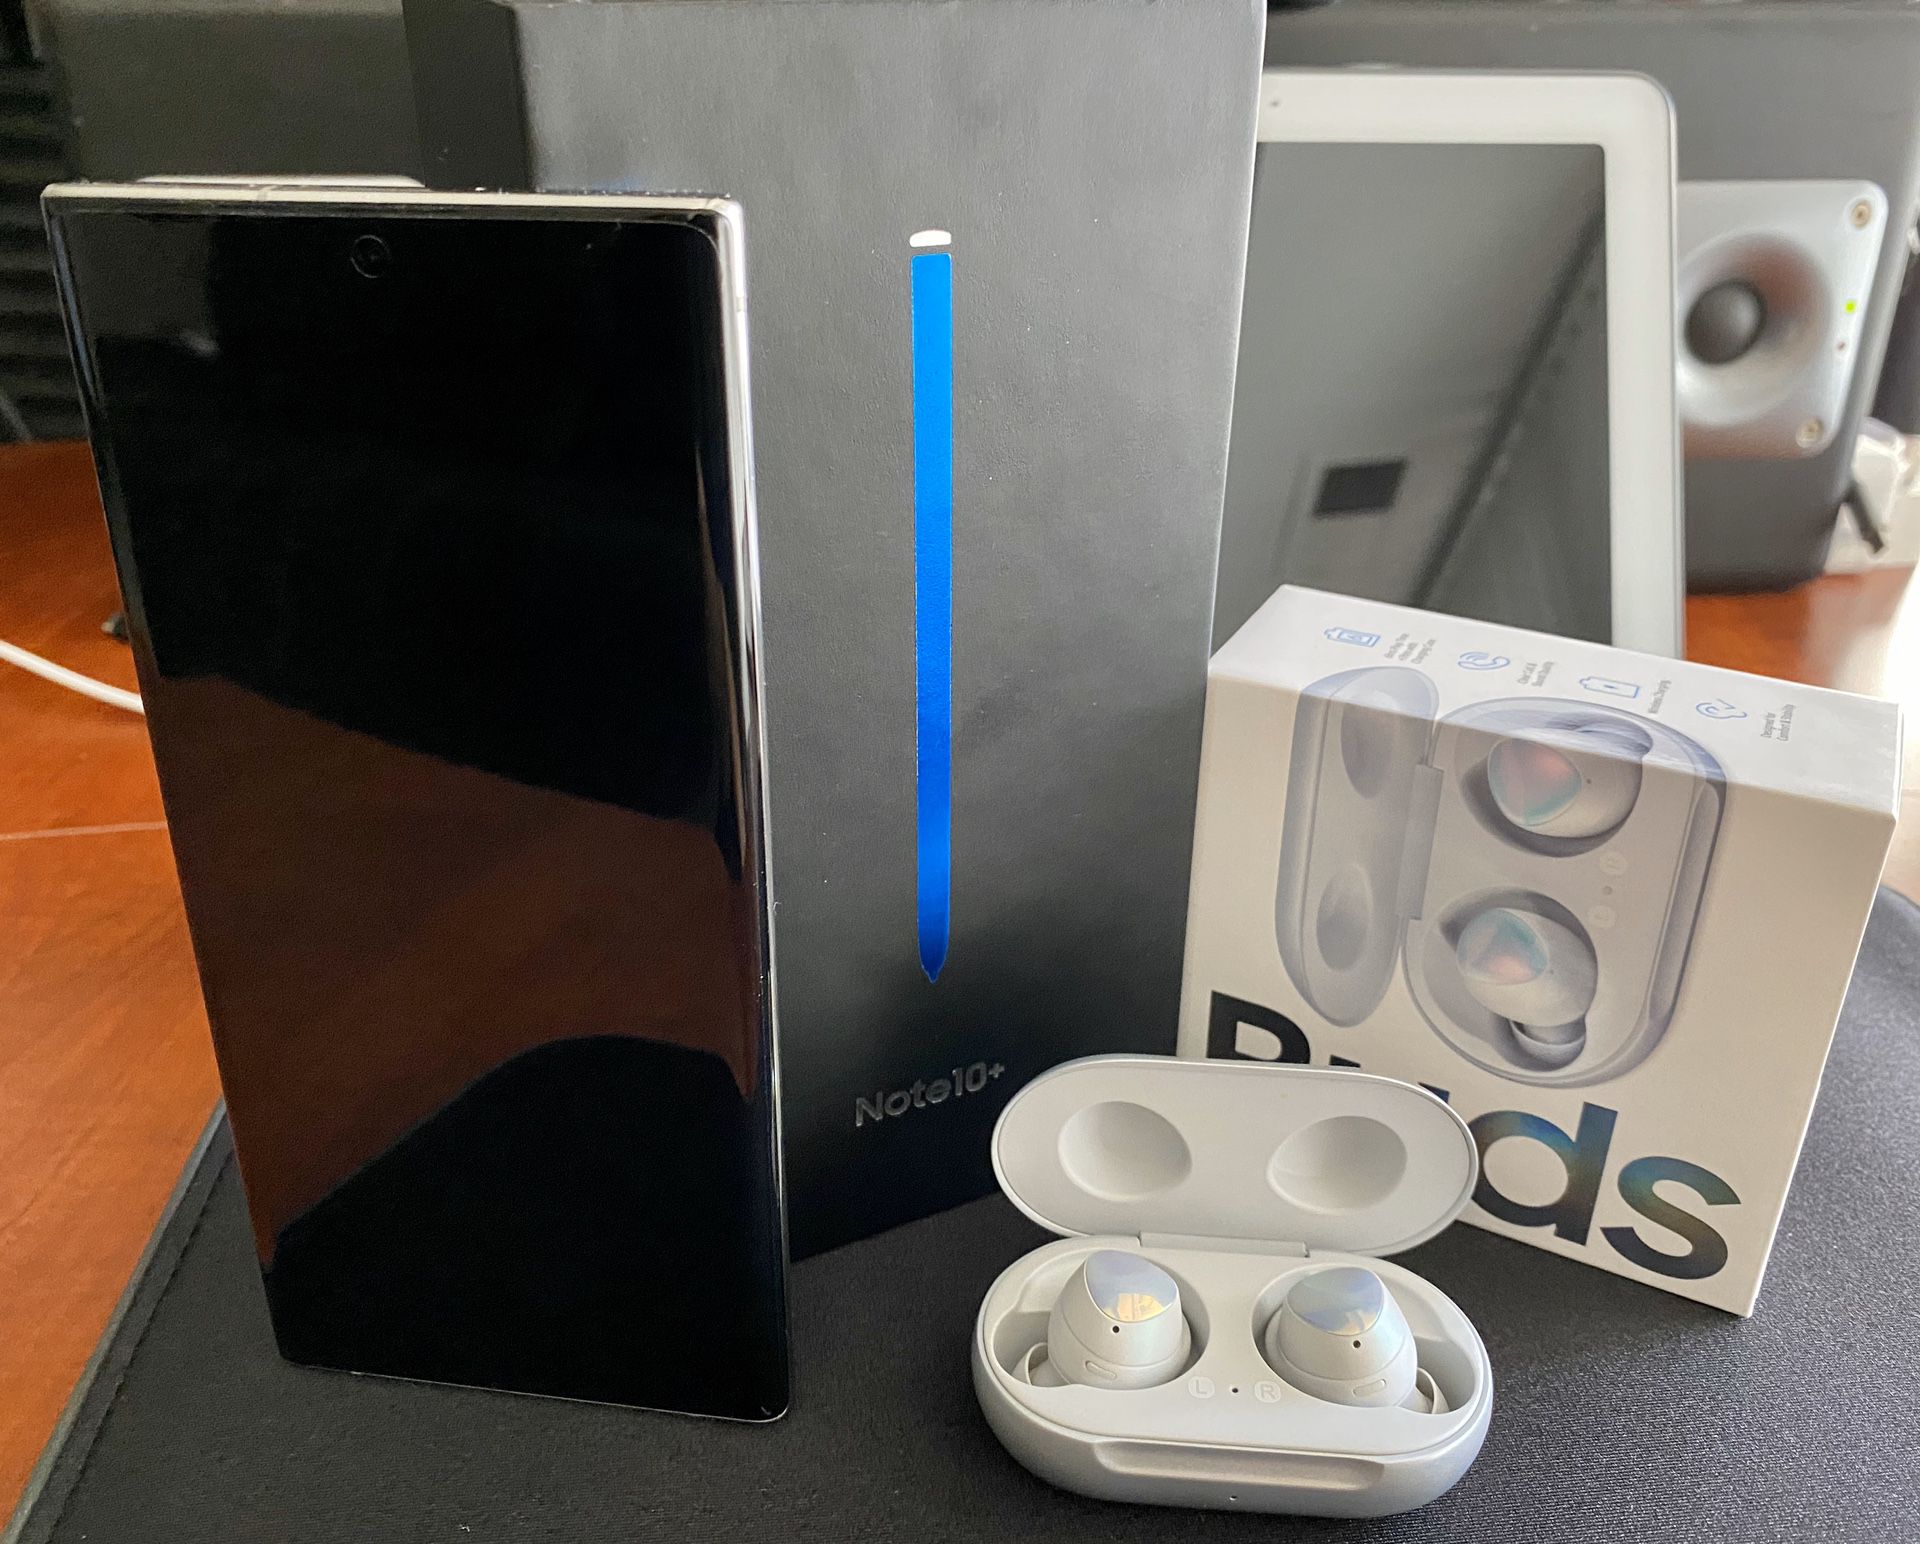 Samsung - Galaxy Note10+ with 256gb Memory Cell Phone (UNLOCKED) - Aura Glow Color + Galaxy Buds wireless earbud headphones